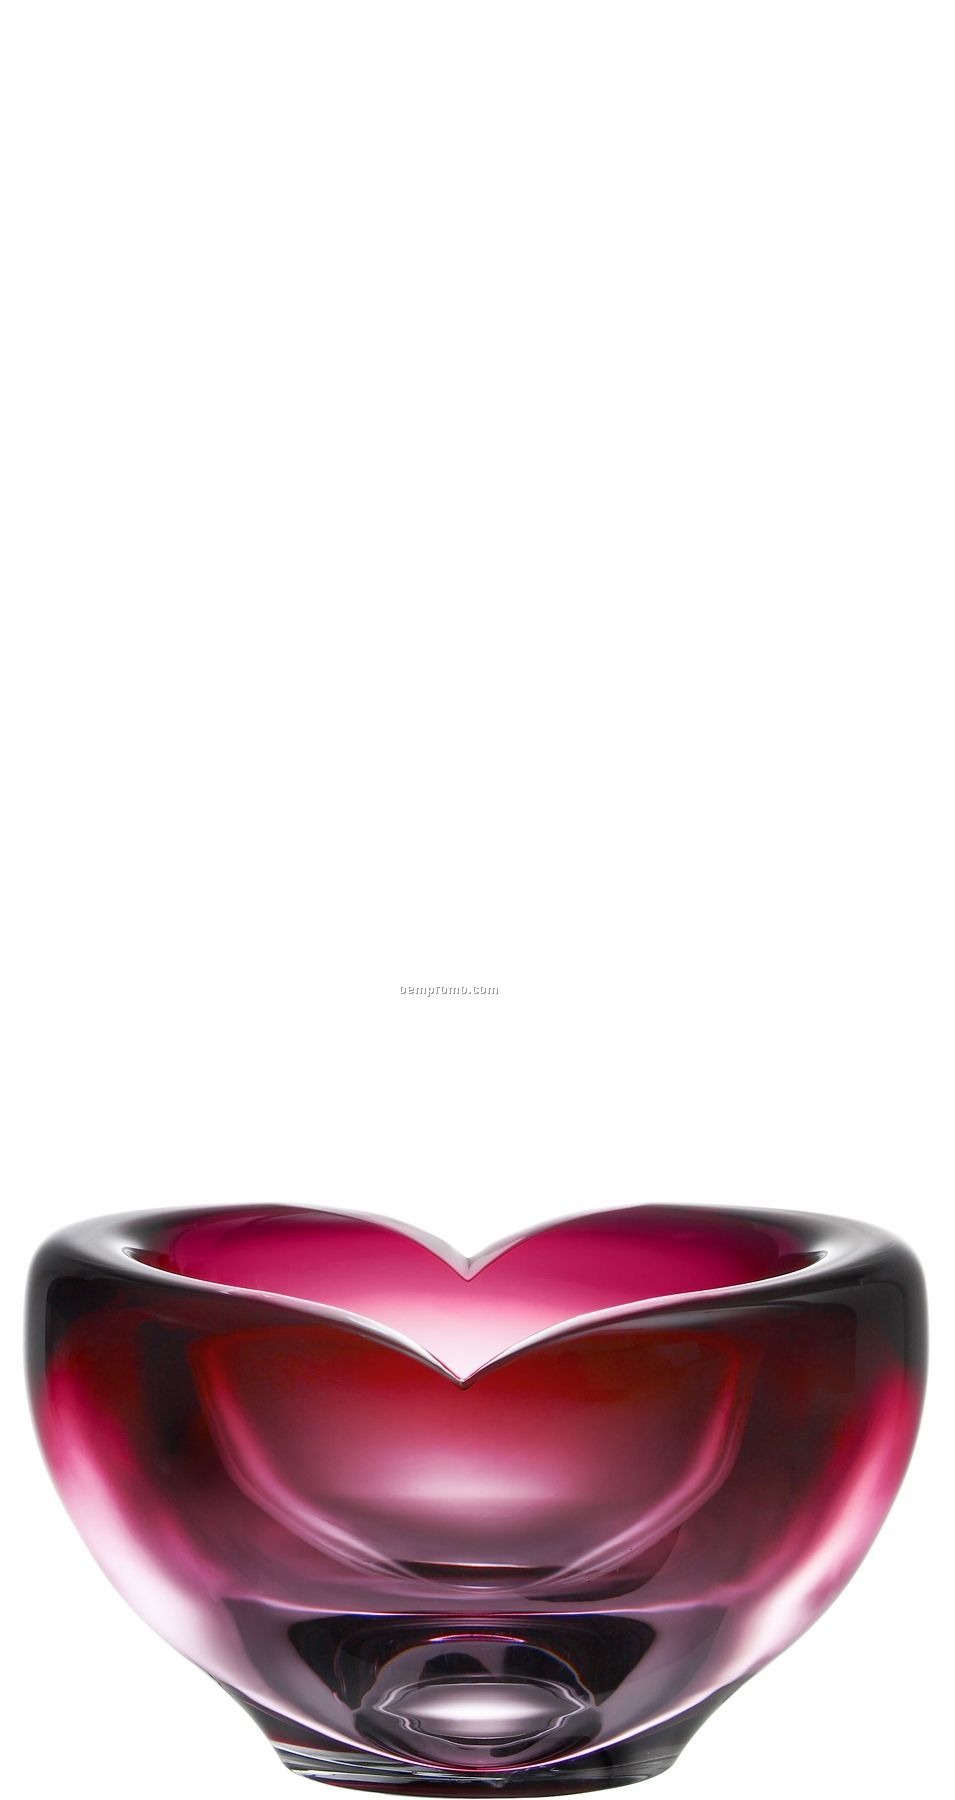 Amore Small Red Heart Bowl By Goran Warff